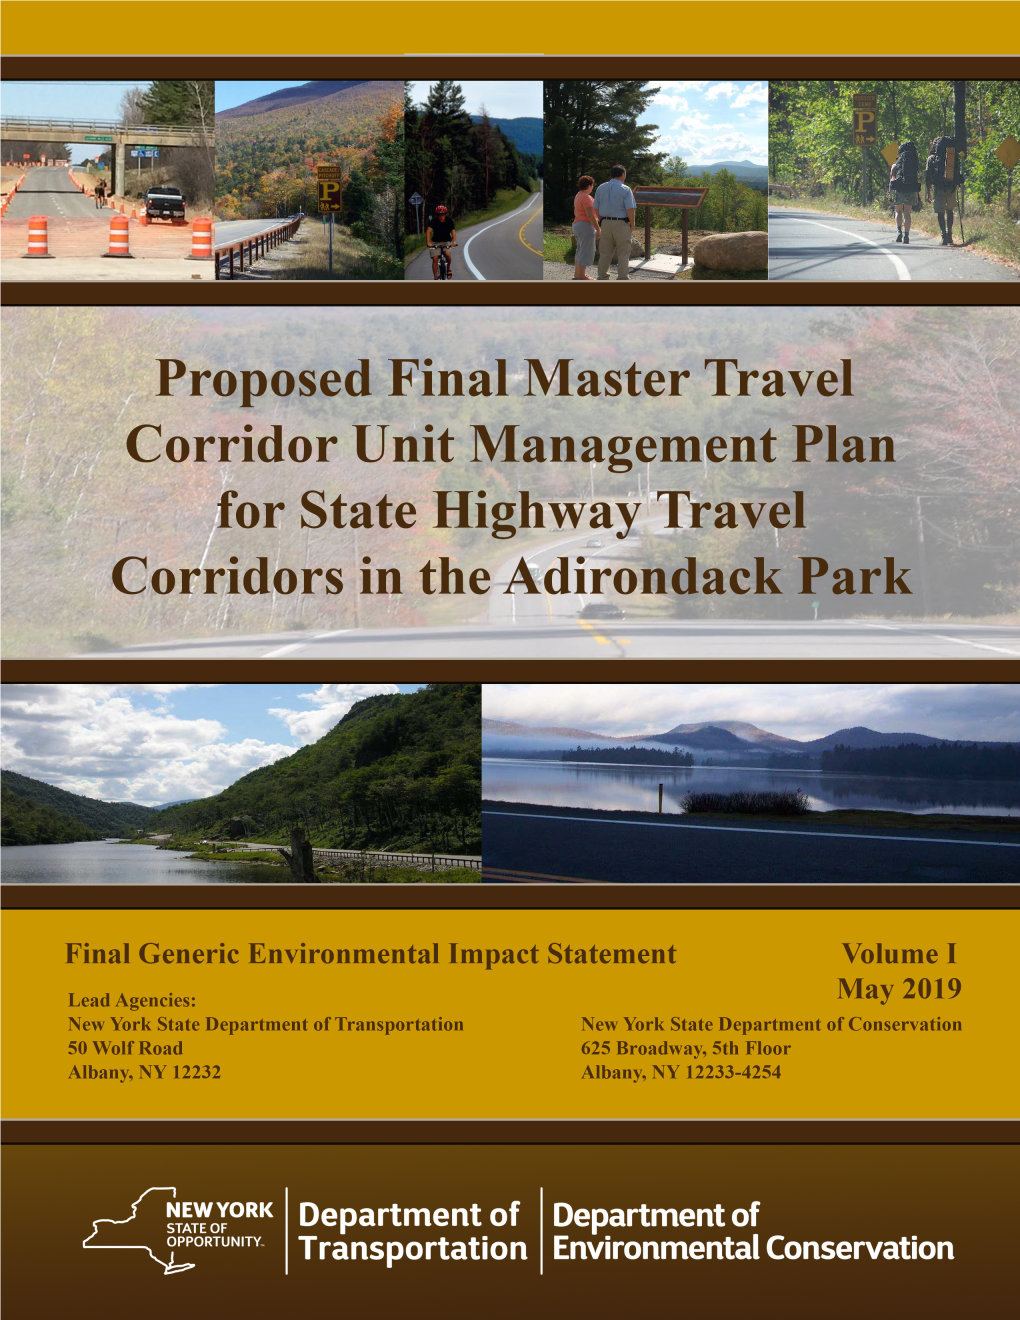 Proposed Final Master Travel Corridor Unit Management Plan for State